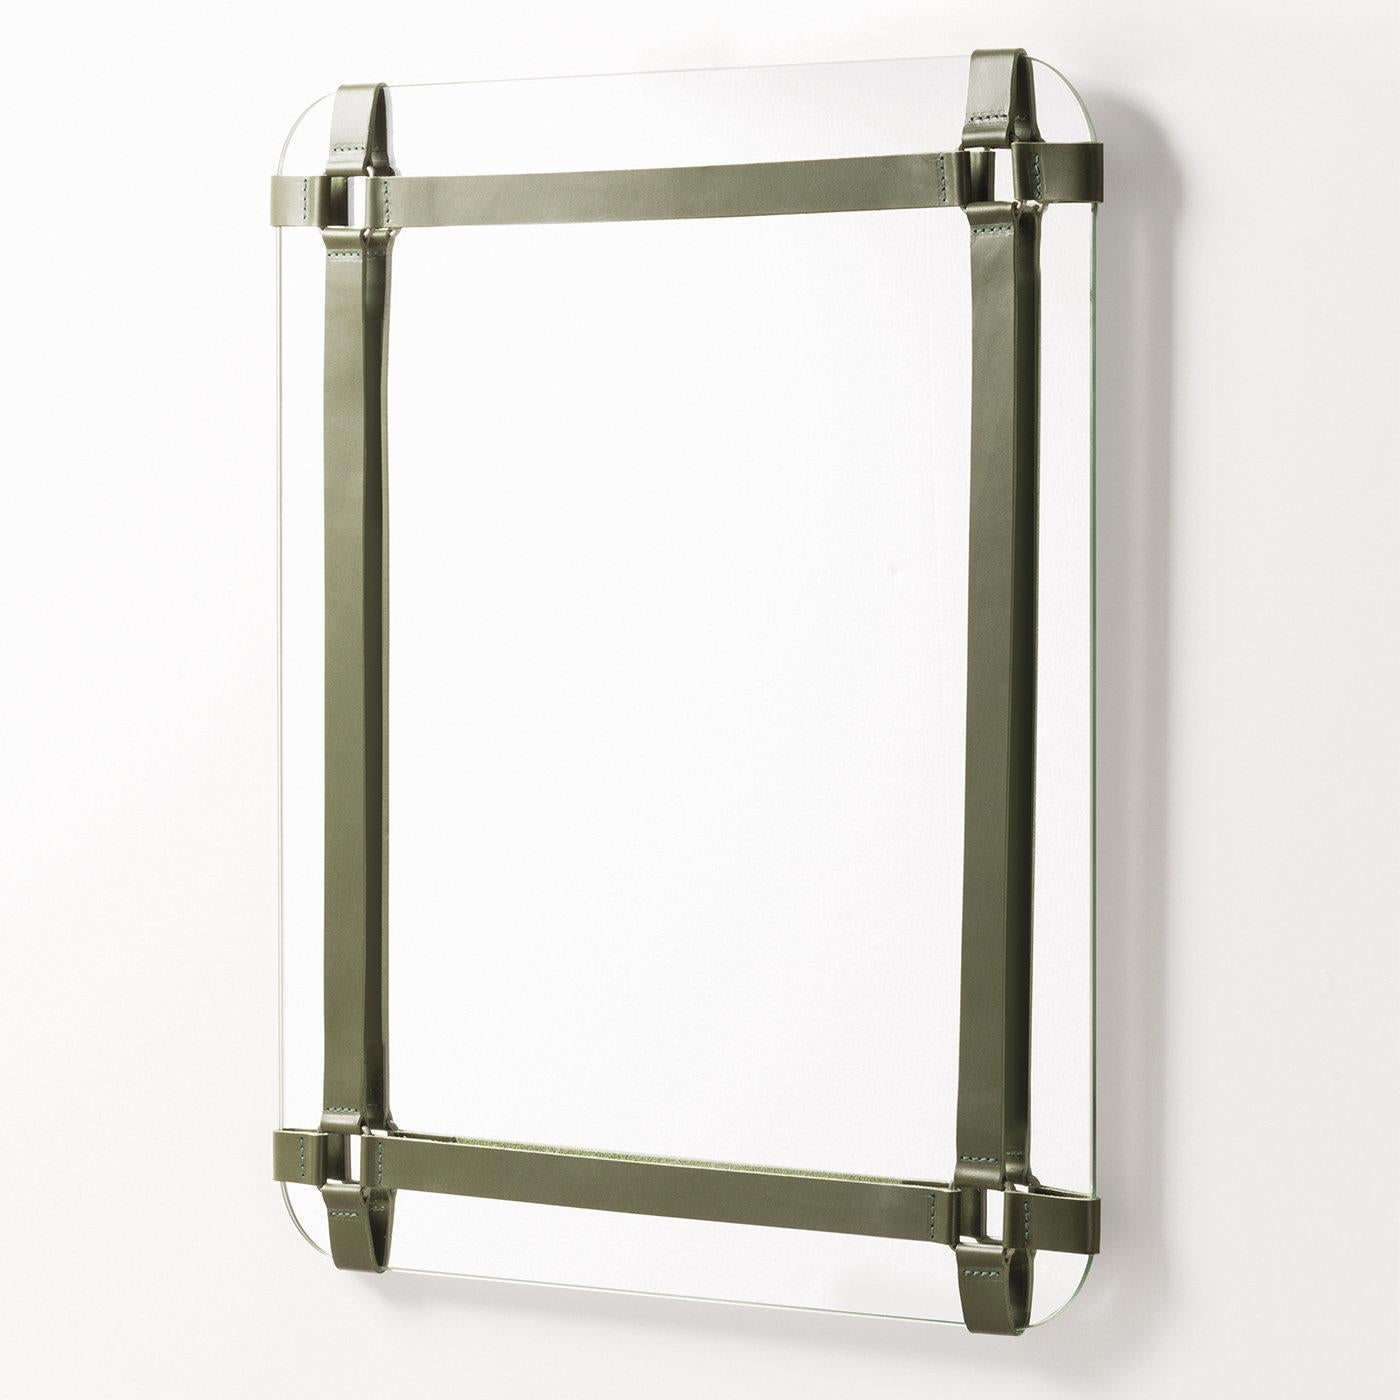 This wall mirror of the Rabitti 1969 collection is perfect for a modern and contemporary design. The frame is made of vegetable tanned saddle leather, which has a special waterproof finishing that lets the leather dry perfectly, without losing its